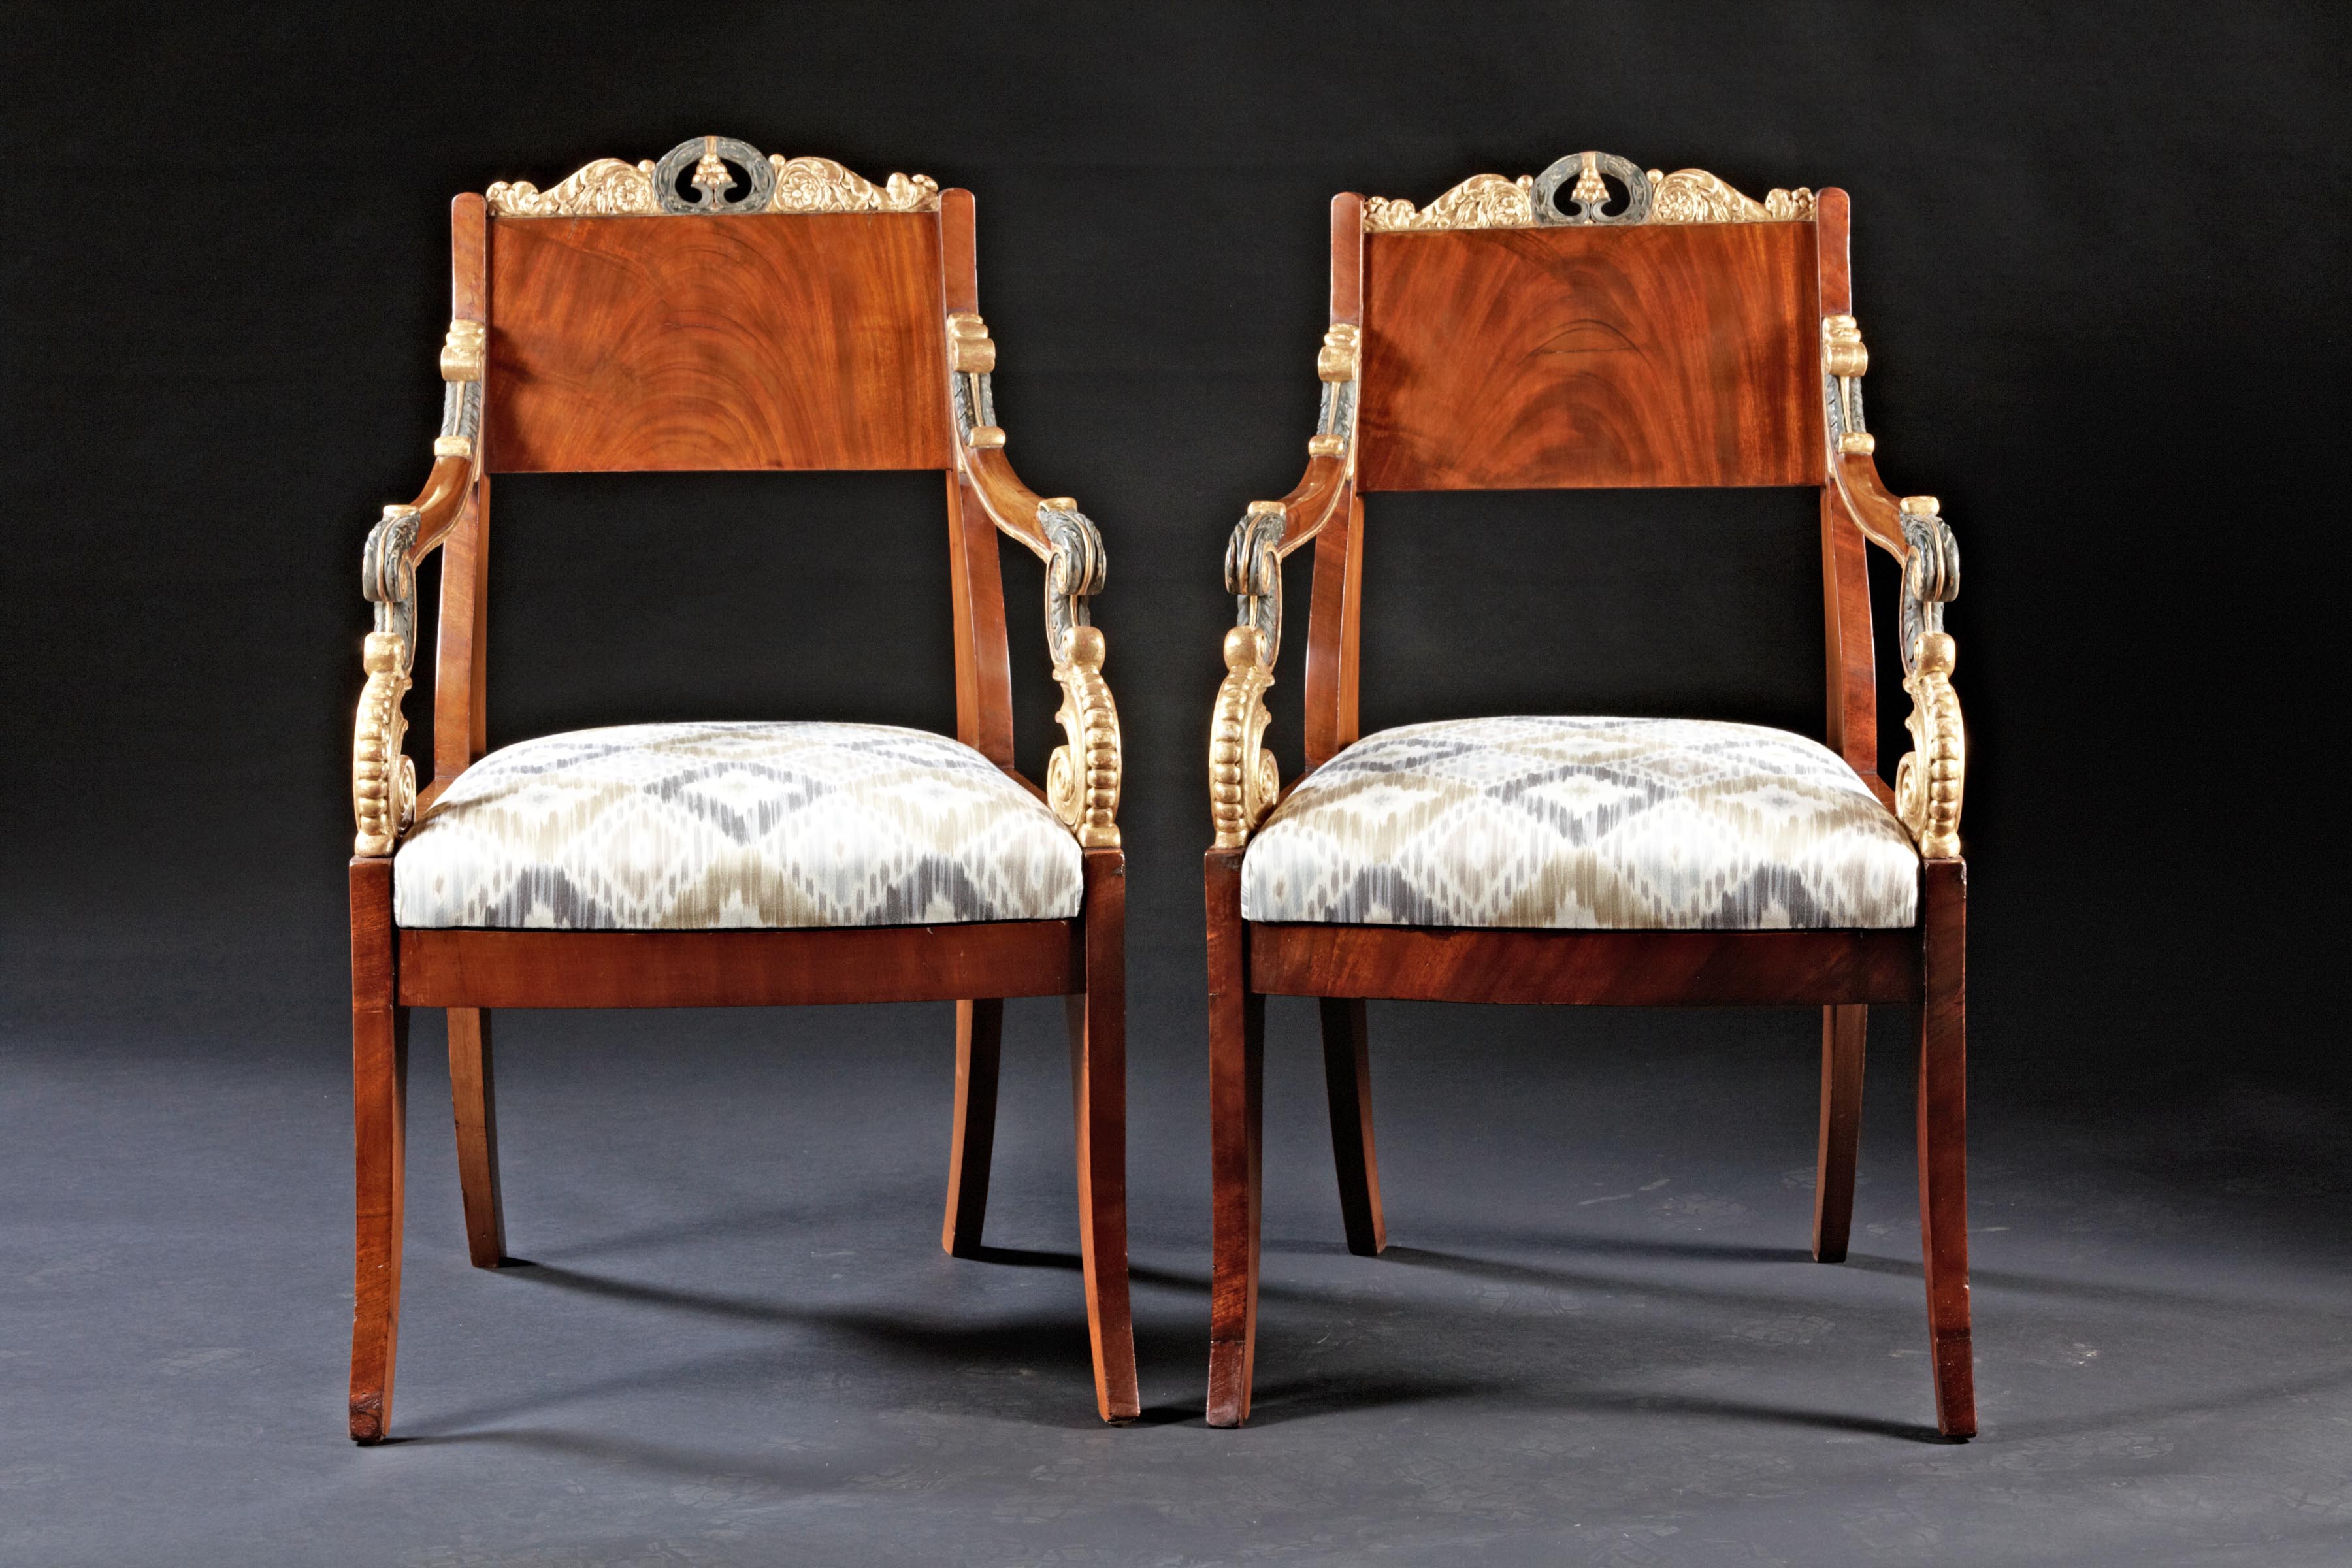 A Fine Pair of Russian Parcel Gilt Mahogany Armchairs